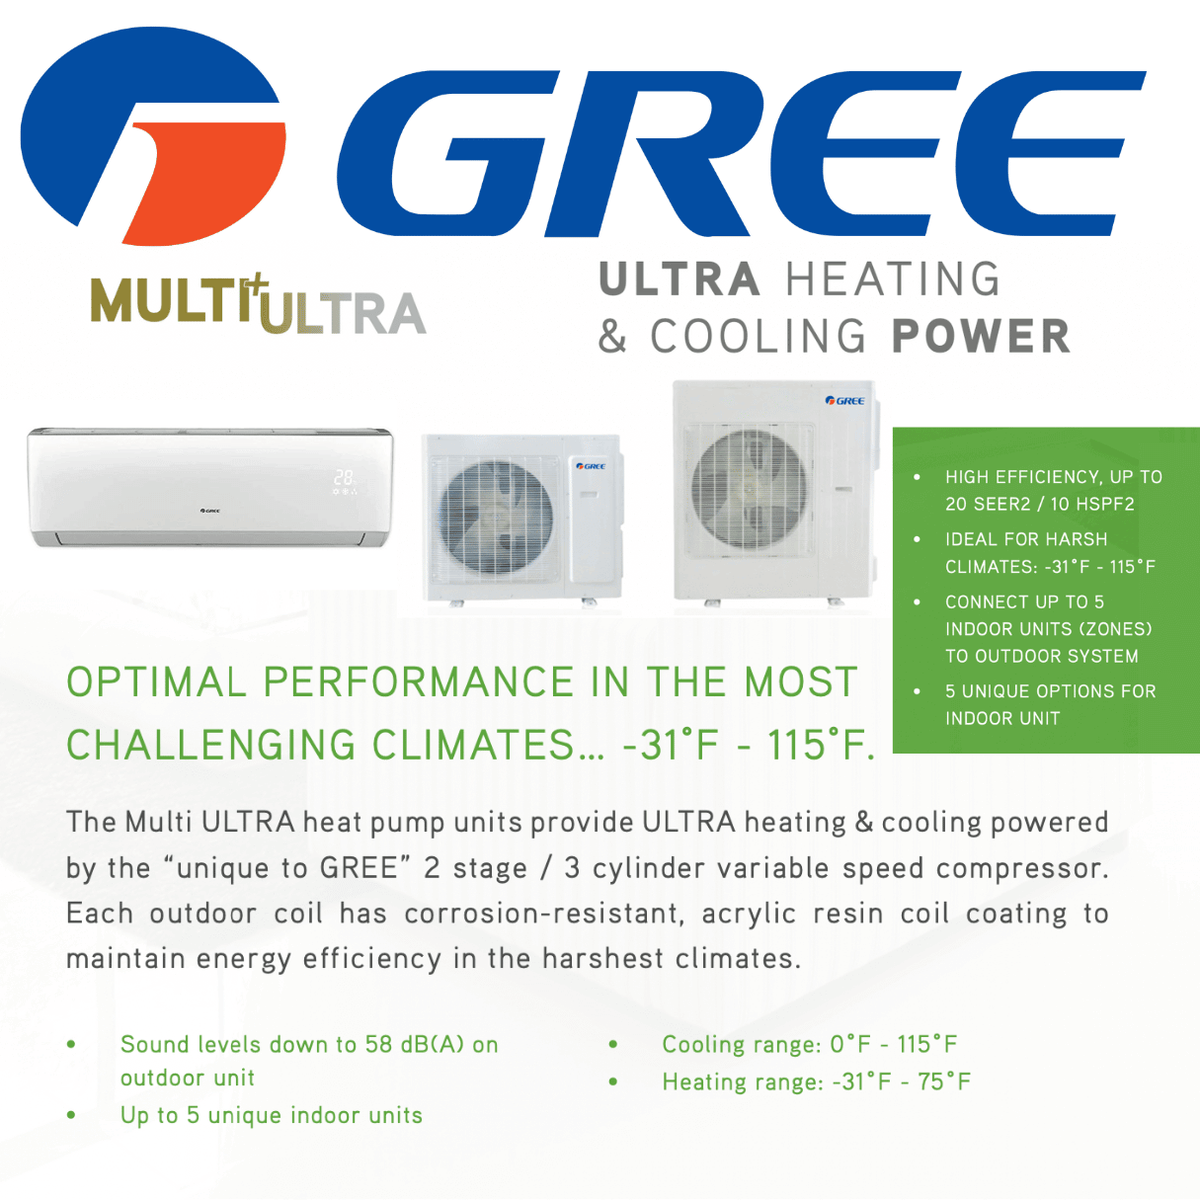 Thermopompe Double Zone Gree Multi+ Ultra Compresseur 18 000 BTU spec sheet with relevant information